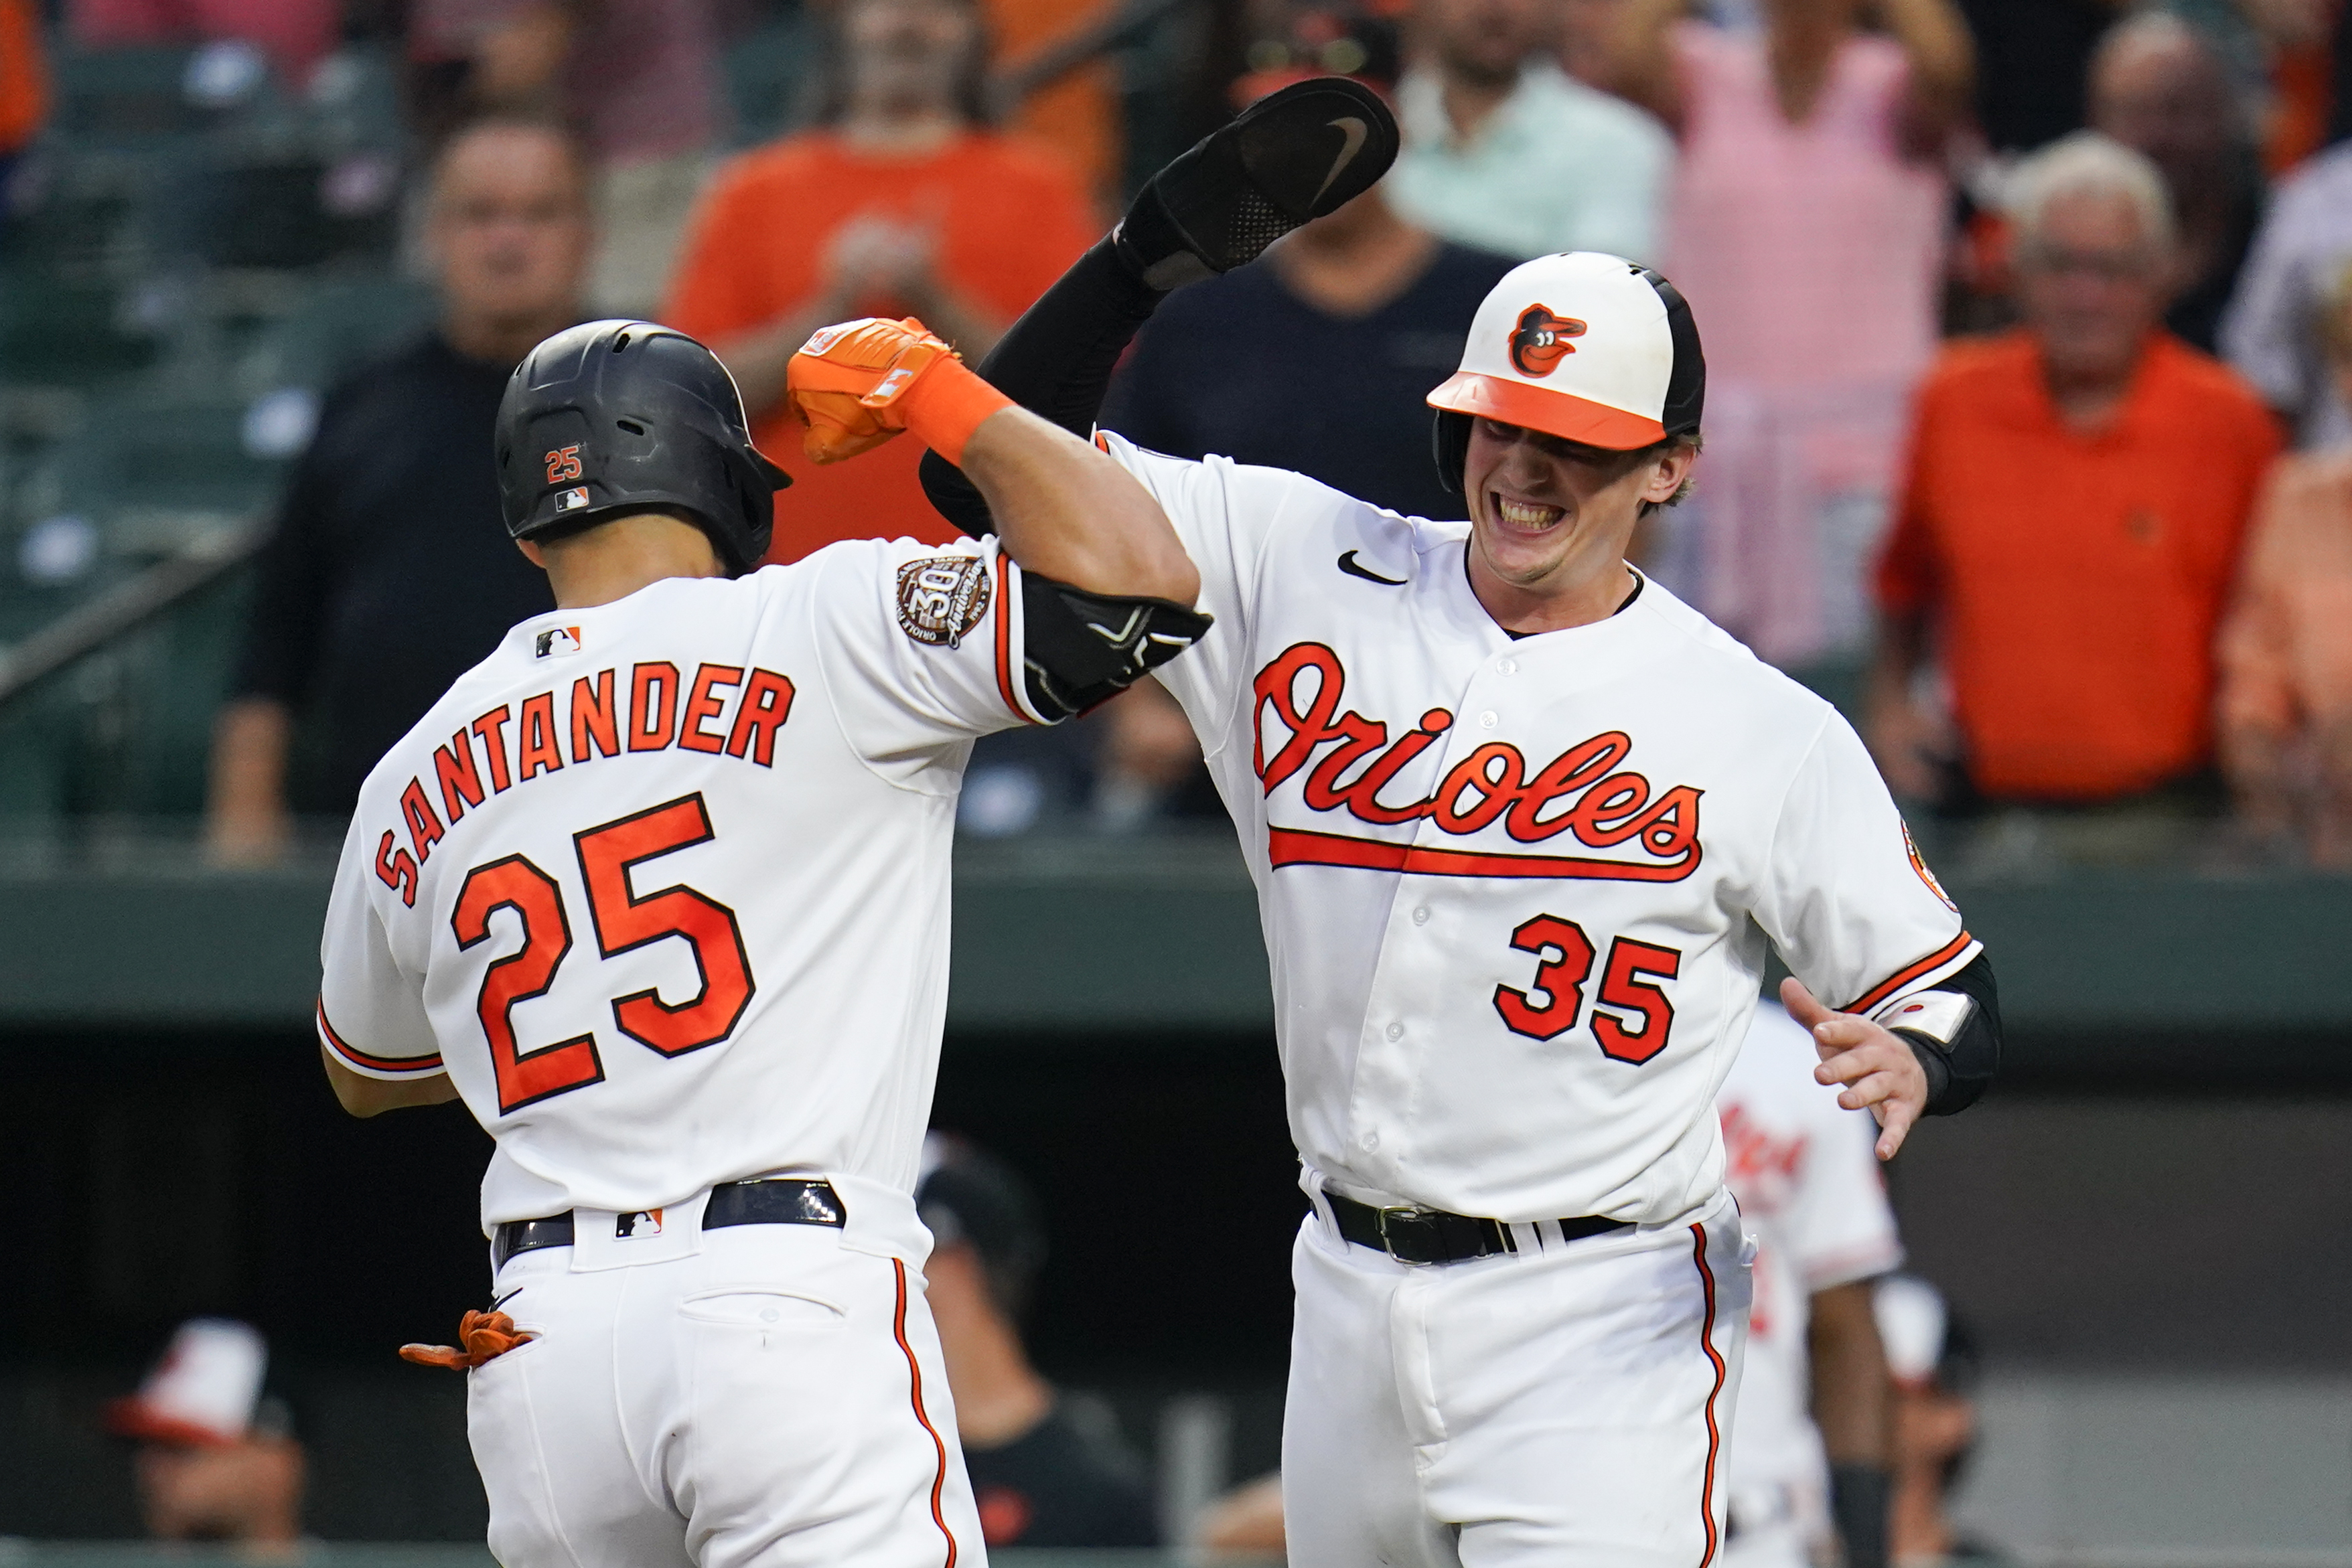 Stock up on Orioles Swag! One lucky Orioles fan will win a $1,000